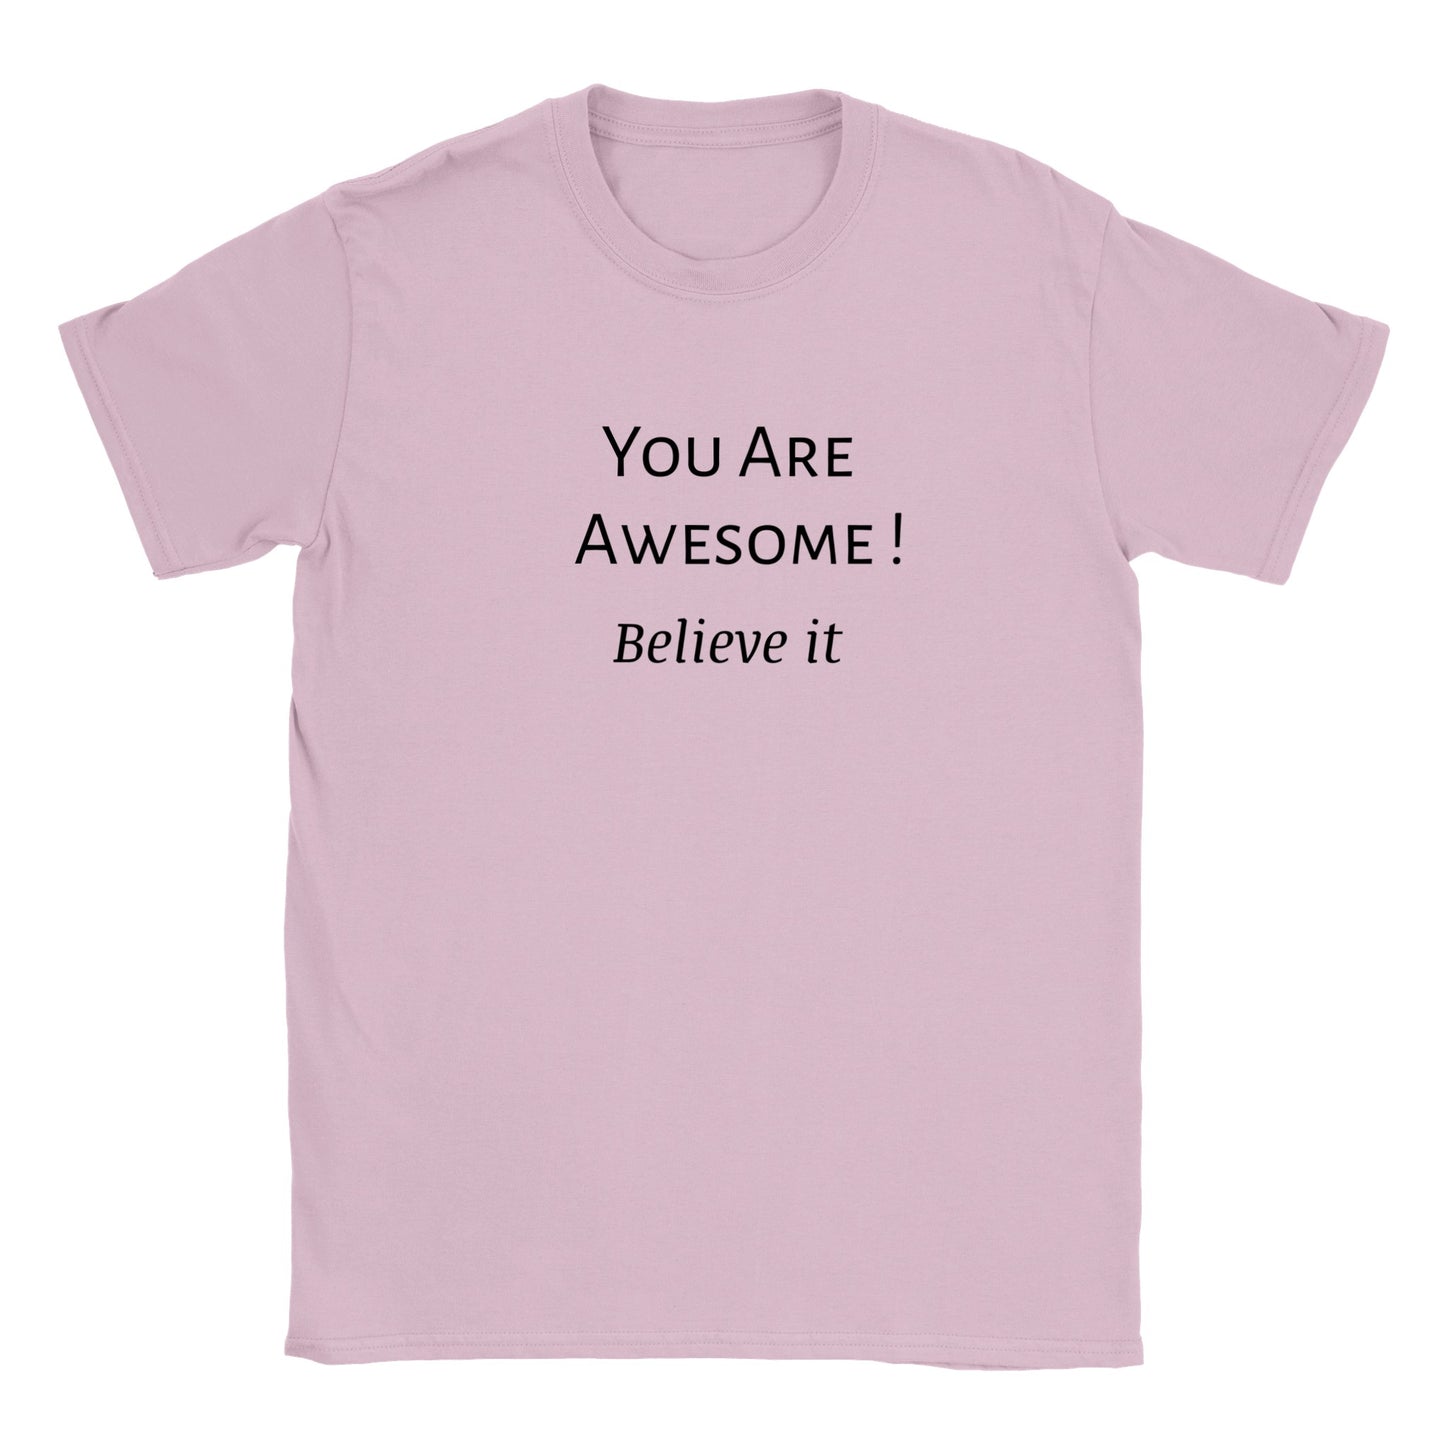 You Are Awesome! Classic Kids Crewneck T-shirt